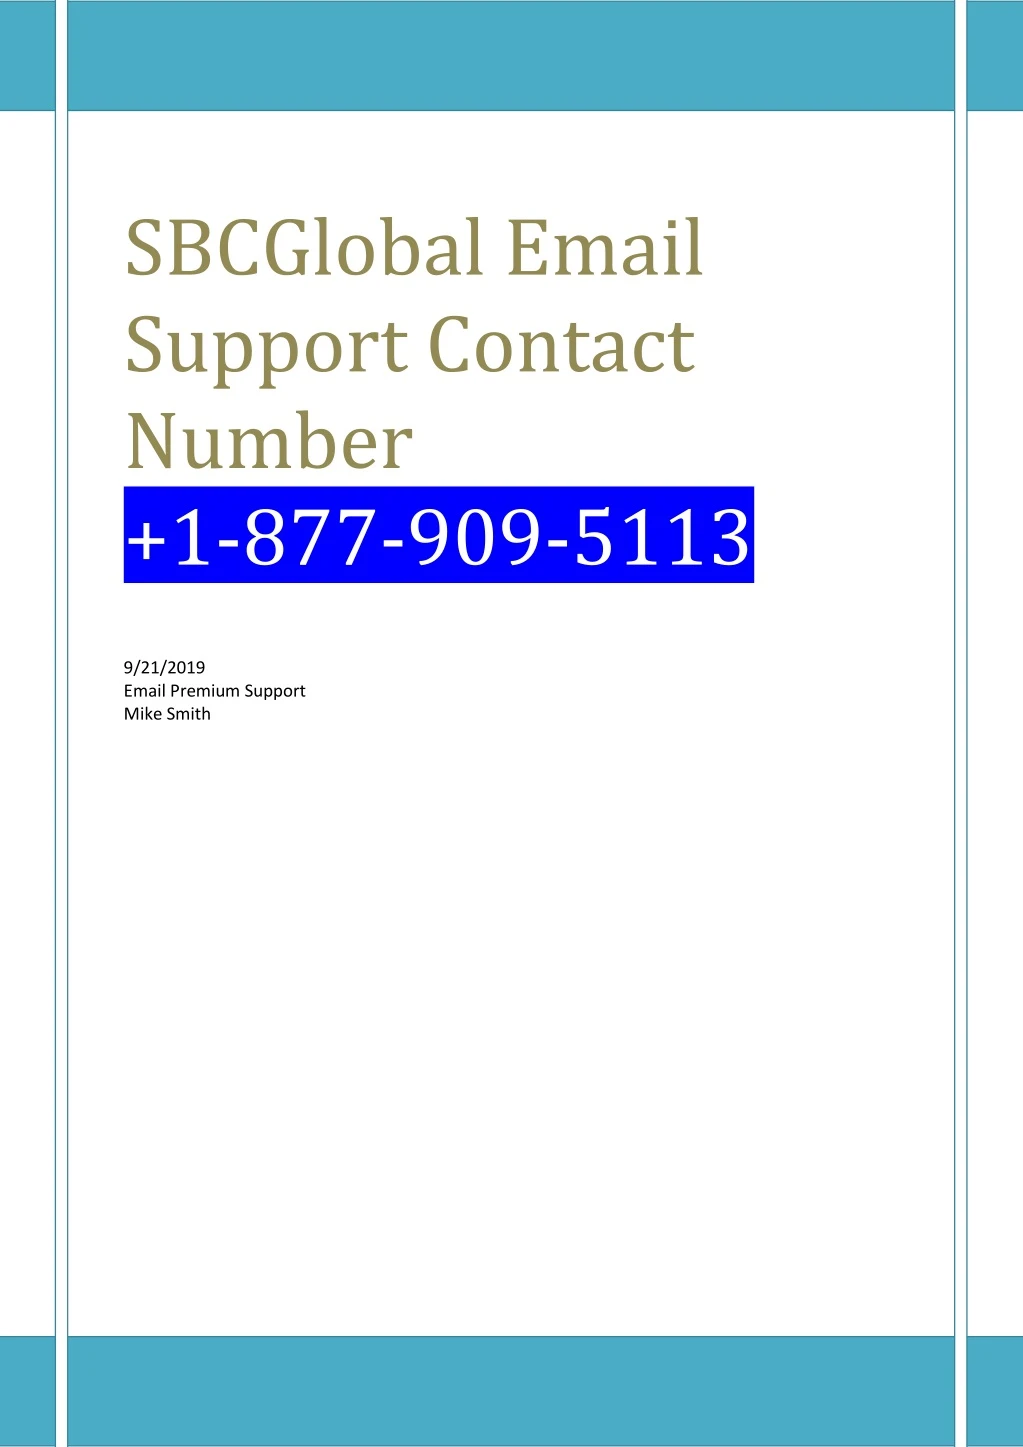 sbcglobal email support contact number